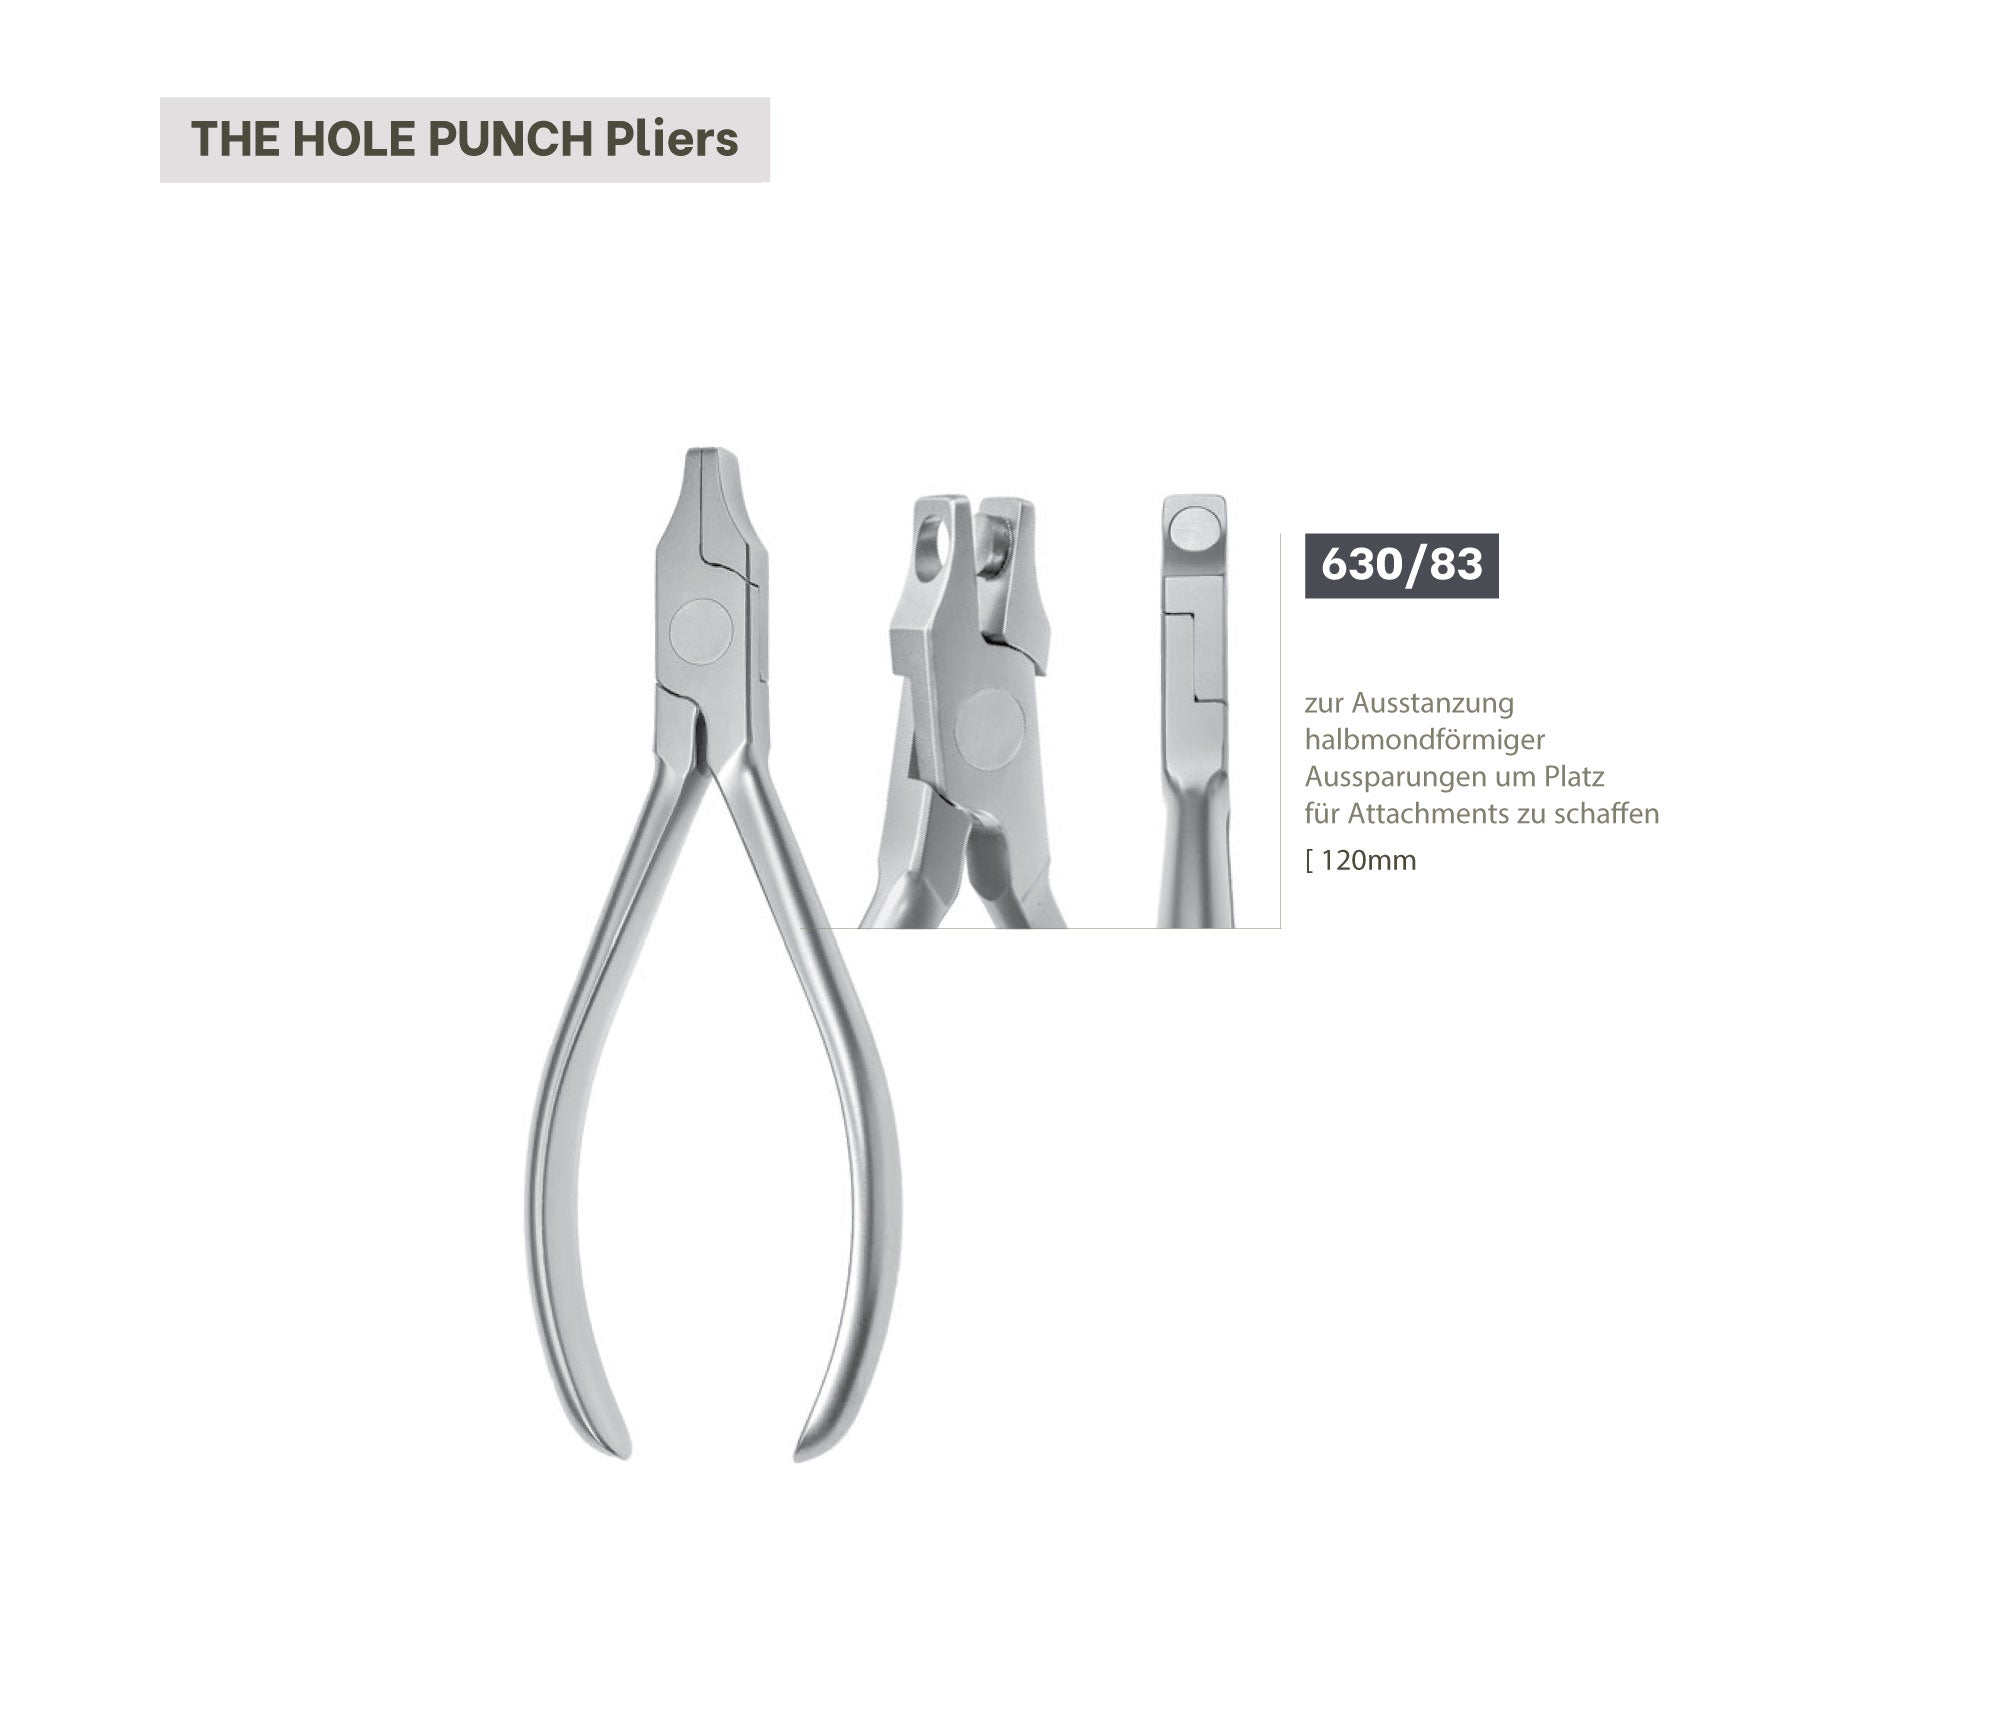 The Hole Punch Pliers